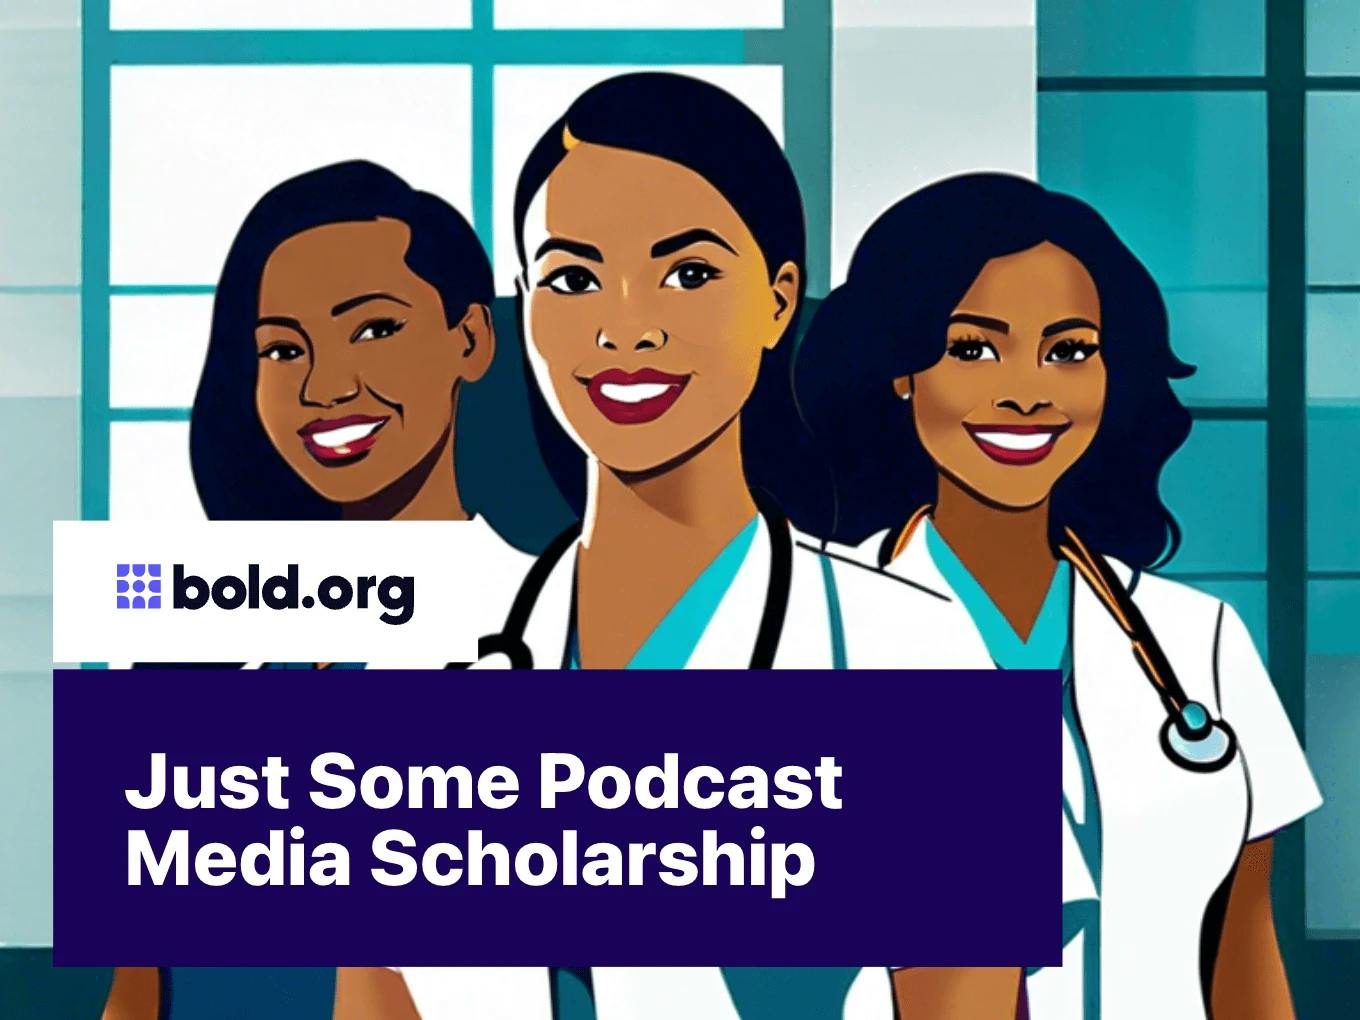 Just Some Podcast Media Scholarship